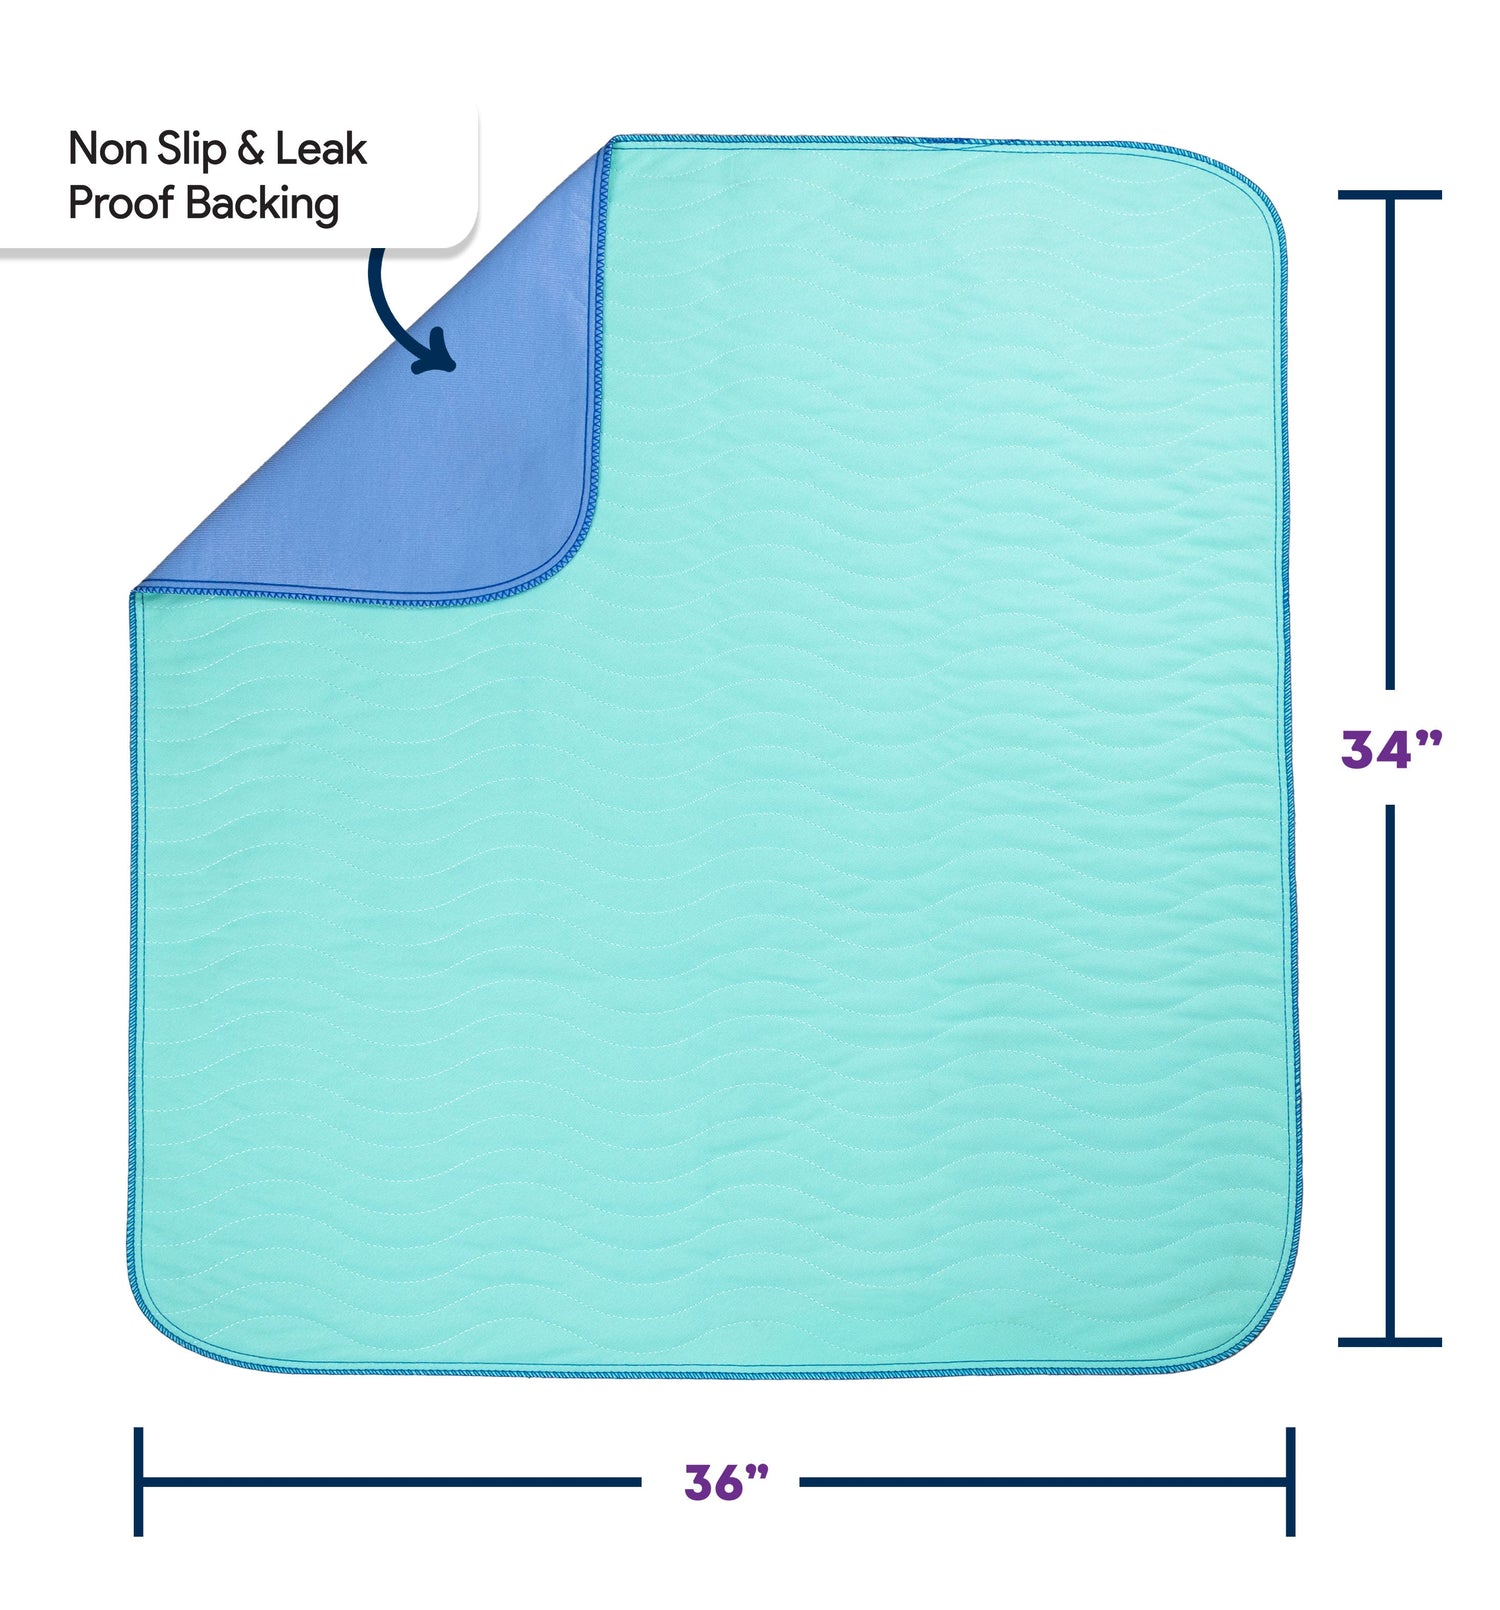 IMPROVIA Washable Bed Pads Heavy Absorbency Reusable Incontinence Pads, 34  x 36” 10-Pack 